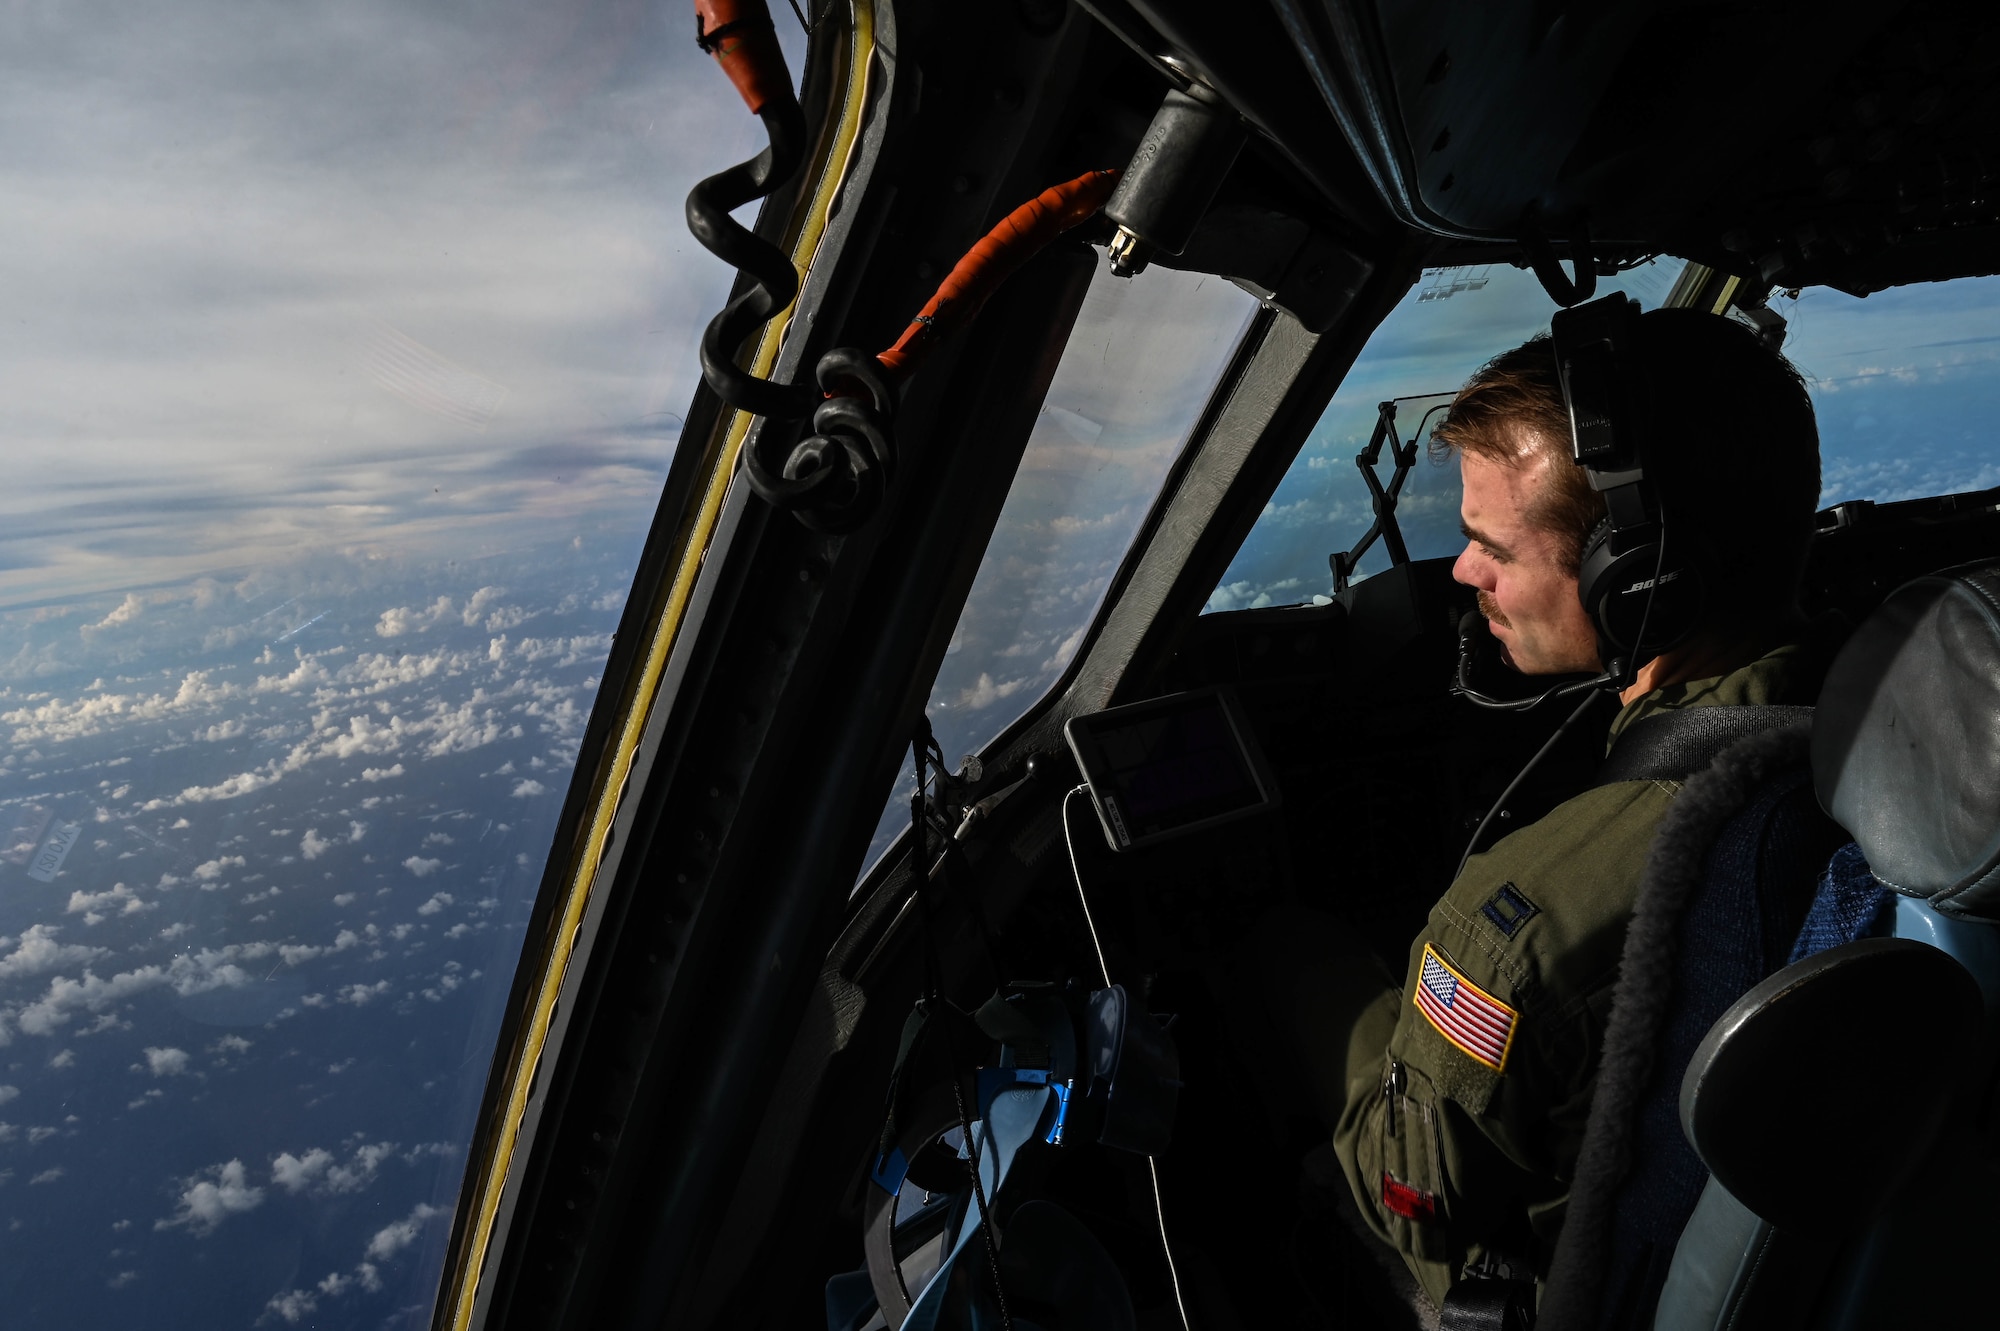 Capt. Alec Nelson, 535th Airlift Squadron C-17A Globemaster III aircraft commander, searches for two Royal Australian Air Force C-17s to form a three-ship formation during a training exercise over the West Pacific, Nov. 14, 2021. The United States Air Force and RAAF continuously train to strengthen their military-to-military relationship and provide regional security and stability within the Indo-Pacific region. (U.S. Air Force photo by Staff Sgt. Alan Ricker)